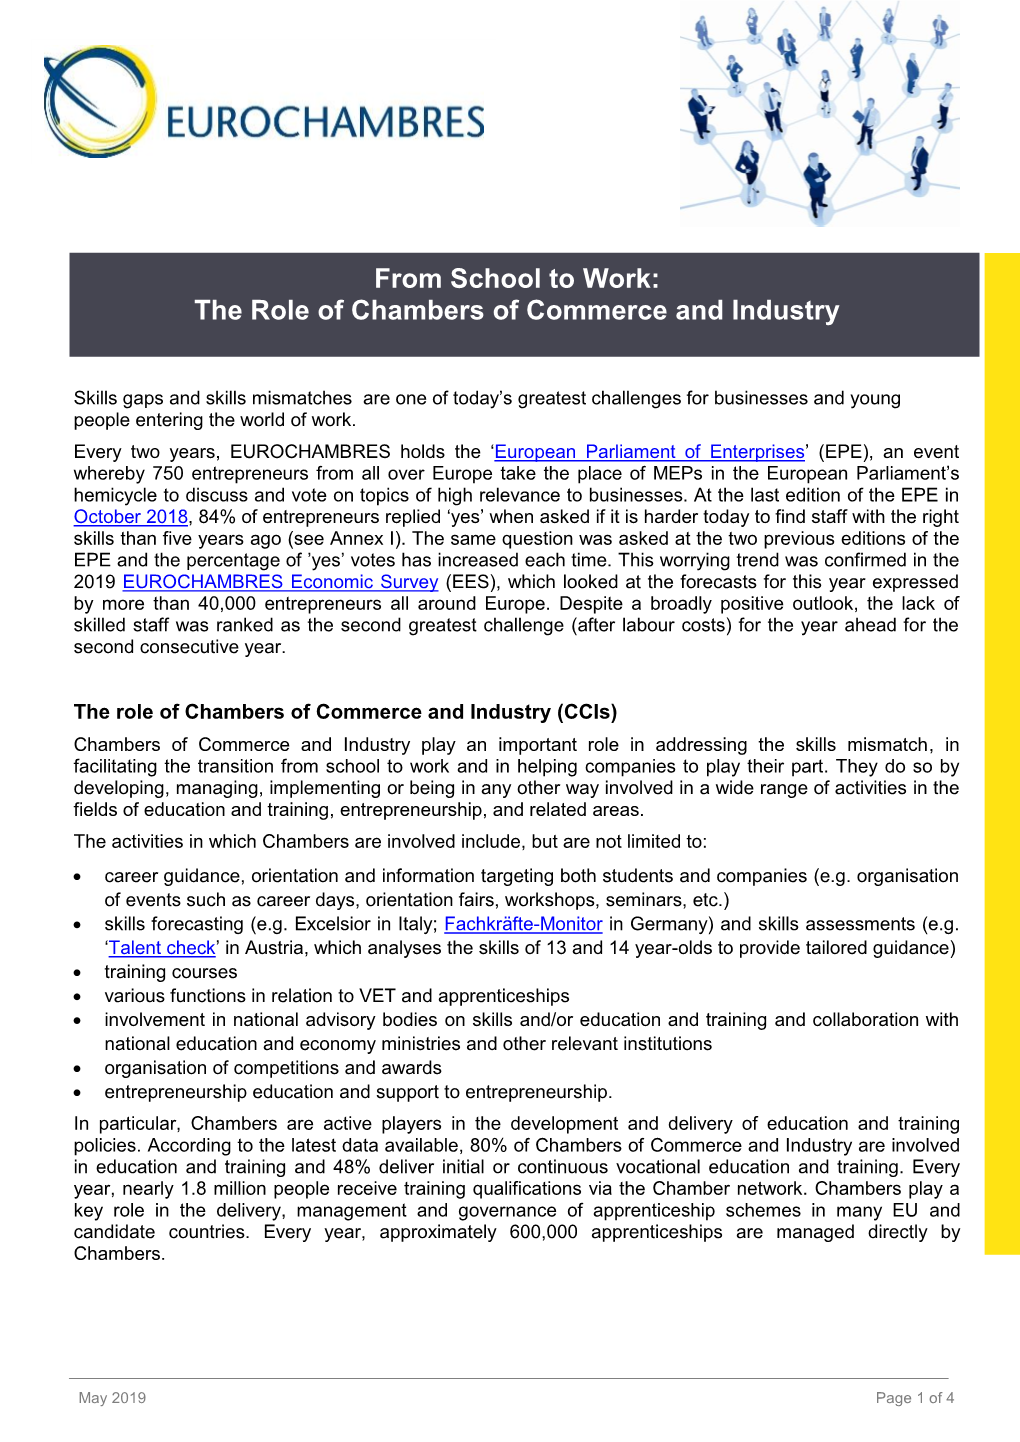 From School to Work: the Role of Chambers of Commerce and Industry